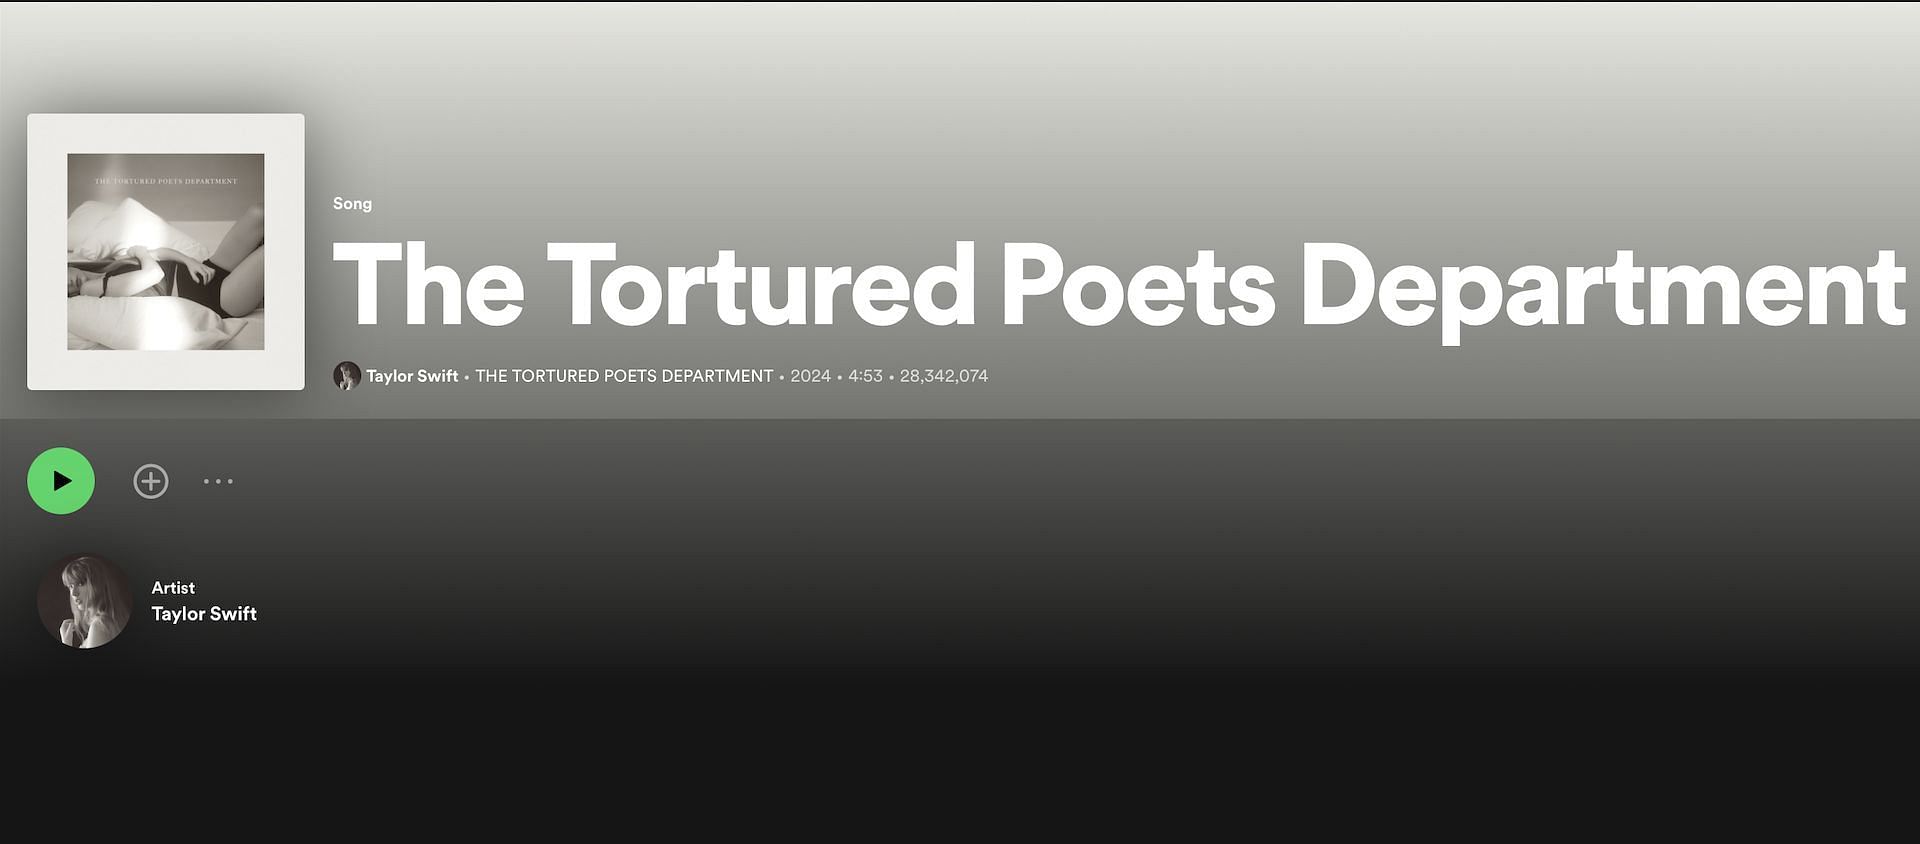 Track 2 on Taylor Swift&#039;s album &#039;THE TORTURED POETS DEPARTMENT&#039; (Image via Spotify)